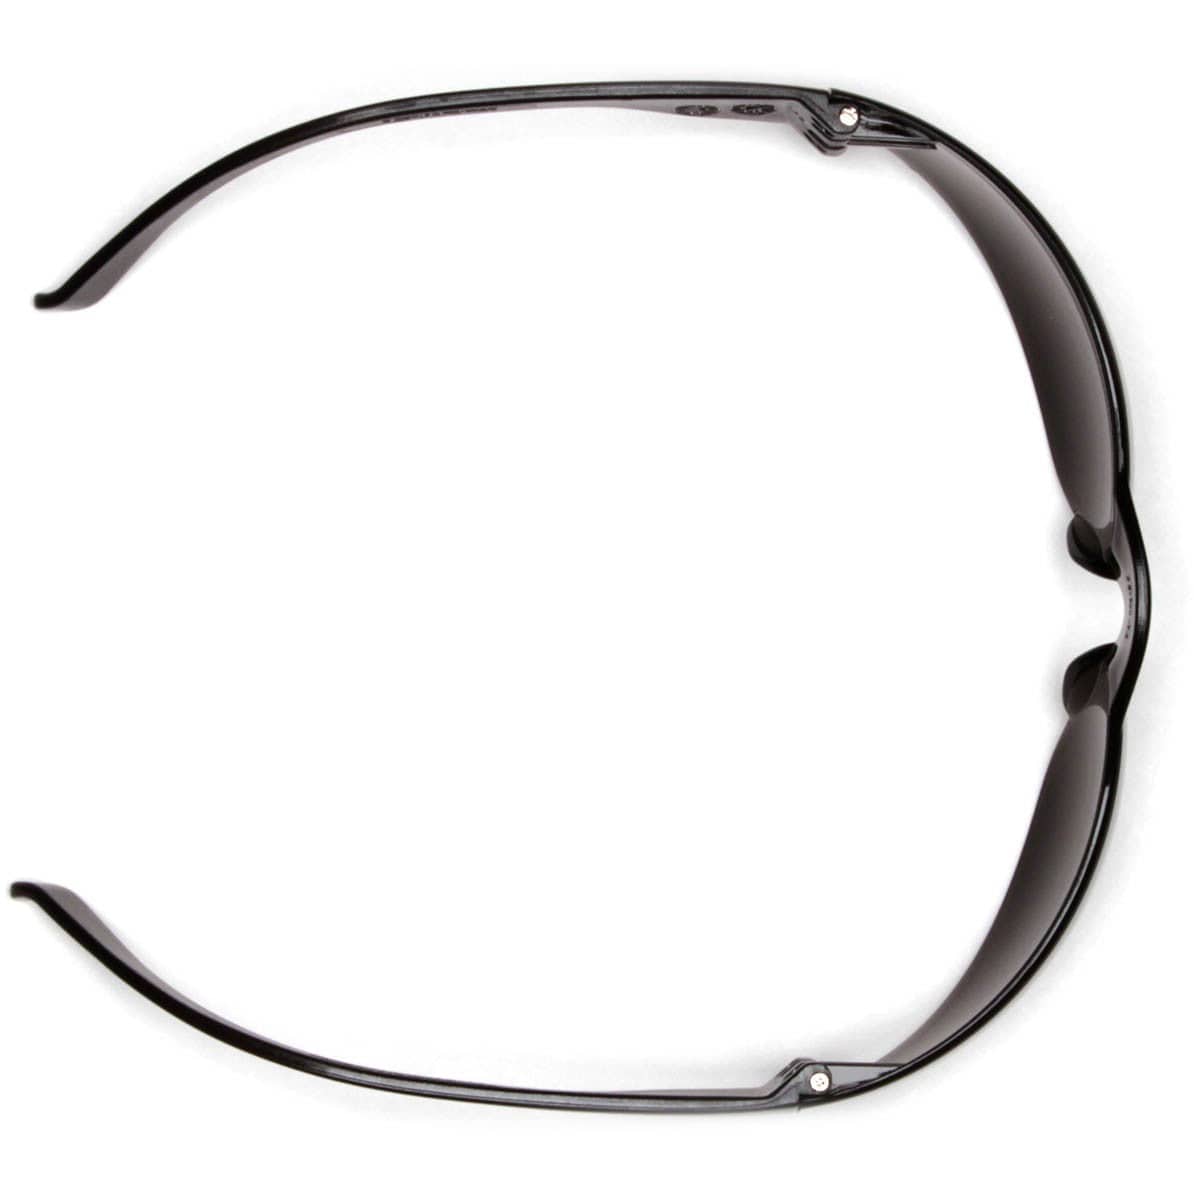 Pyramex Mini Intruder Safety Glasses with Gray Lens S4120SN Top View